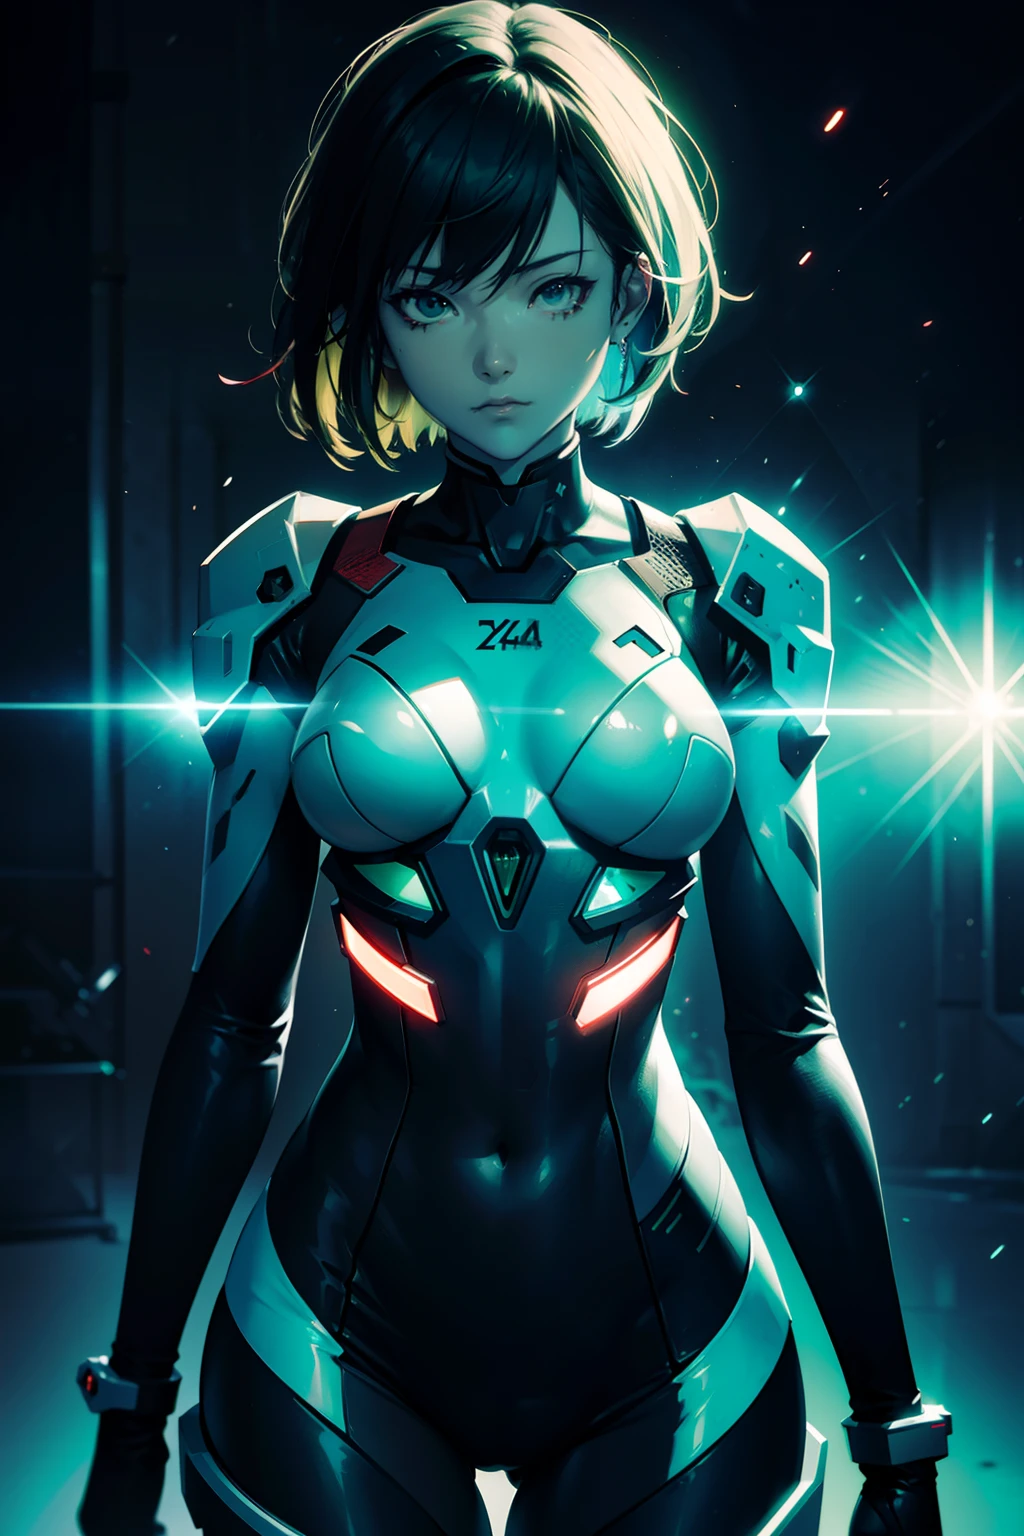 Asuka-Evangelion (((From face to the waist view::1. 4))), realistic skin texture, front view::1.0, in complex & hyper detailed crimson and black plugsuit armor (((light glow effect in dark green shade aesthetic in image))), dinamic panning photography move/pose::1, midnight hour illuminationr, (masterpiece), best quality, perfect pretty face, 8k